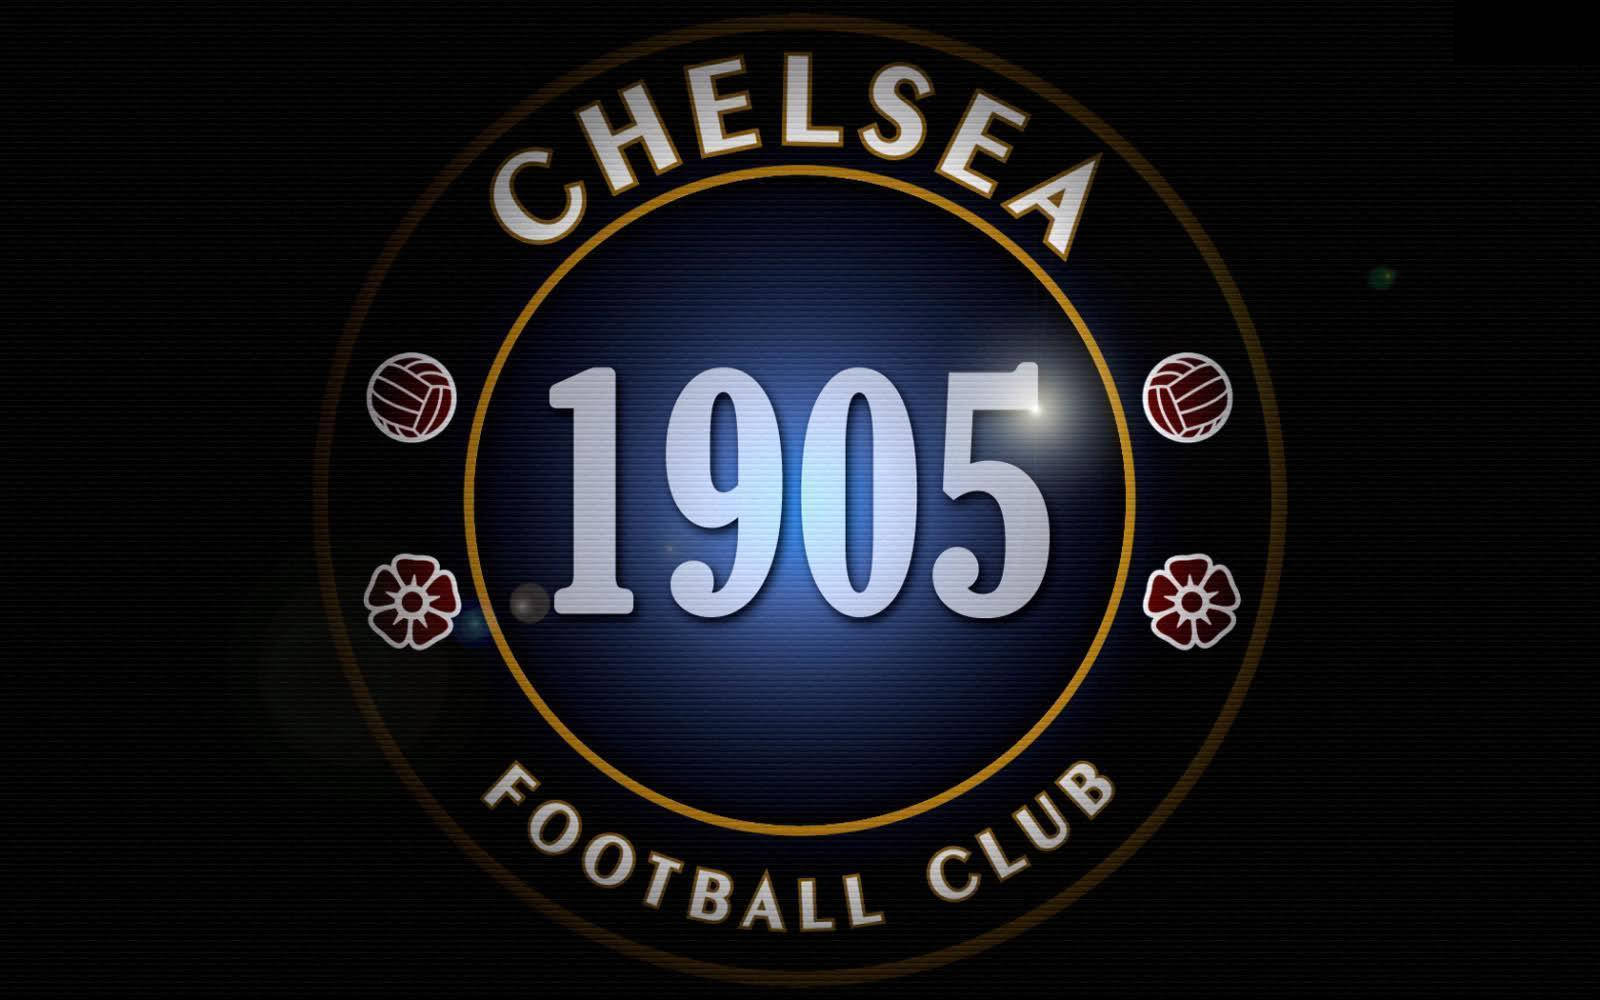 Chelsea Fc Logo With Founding Year Background